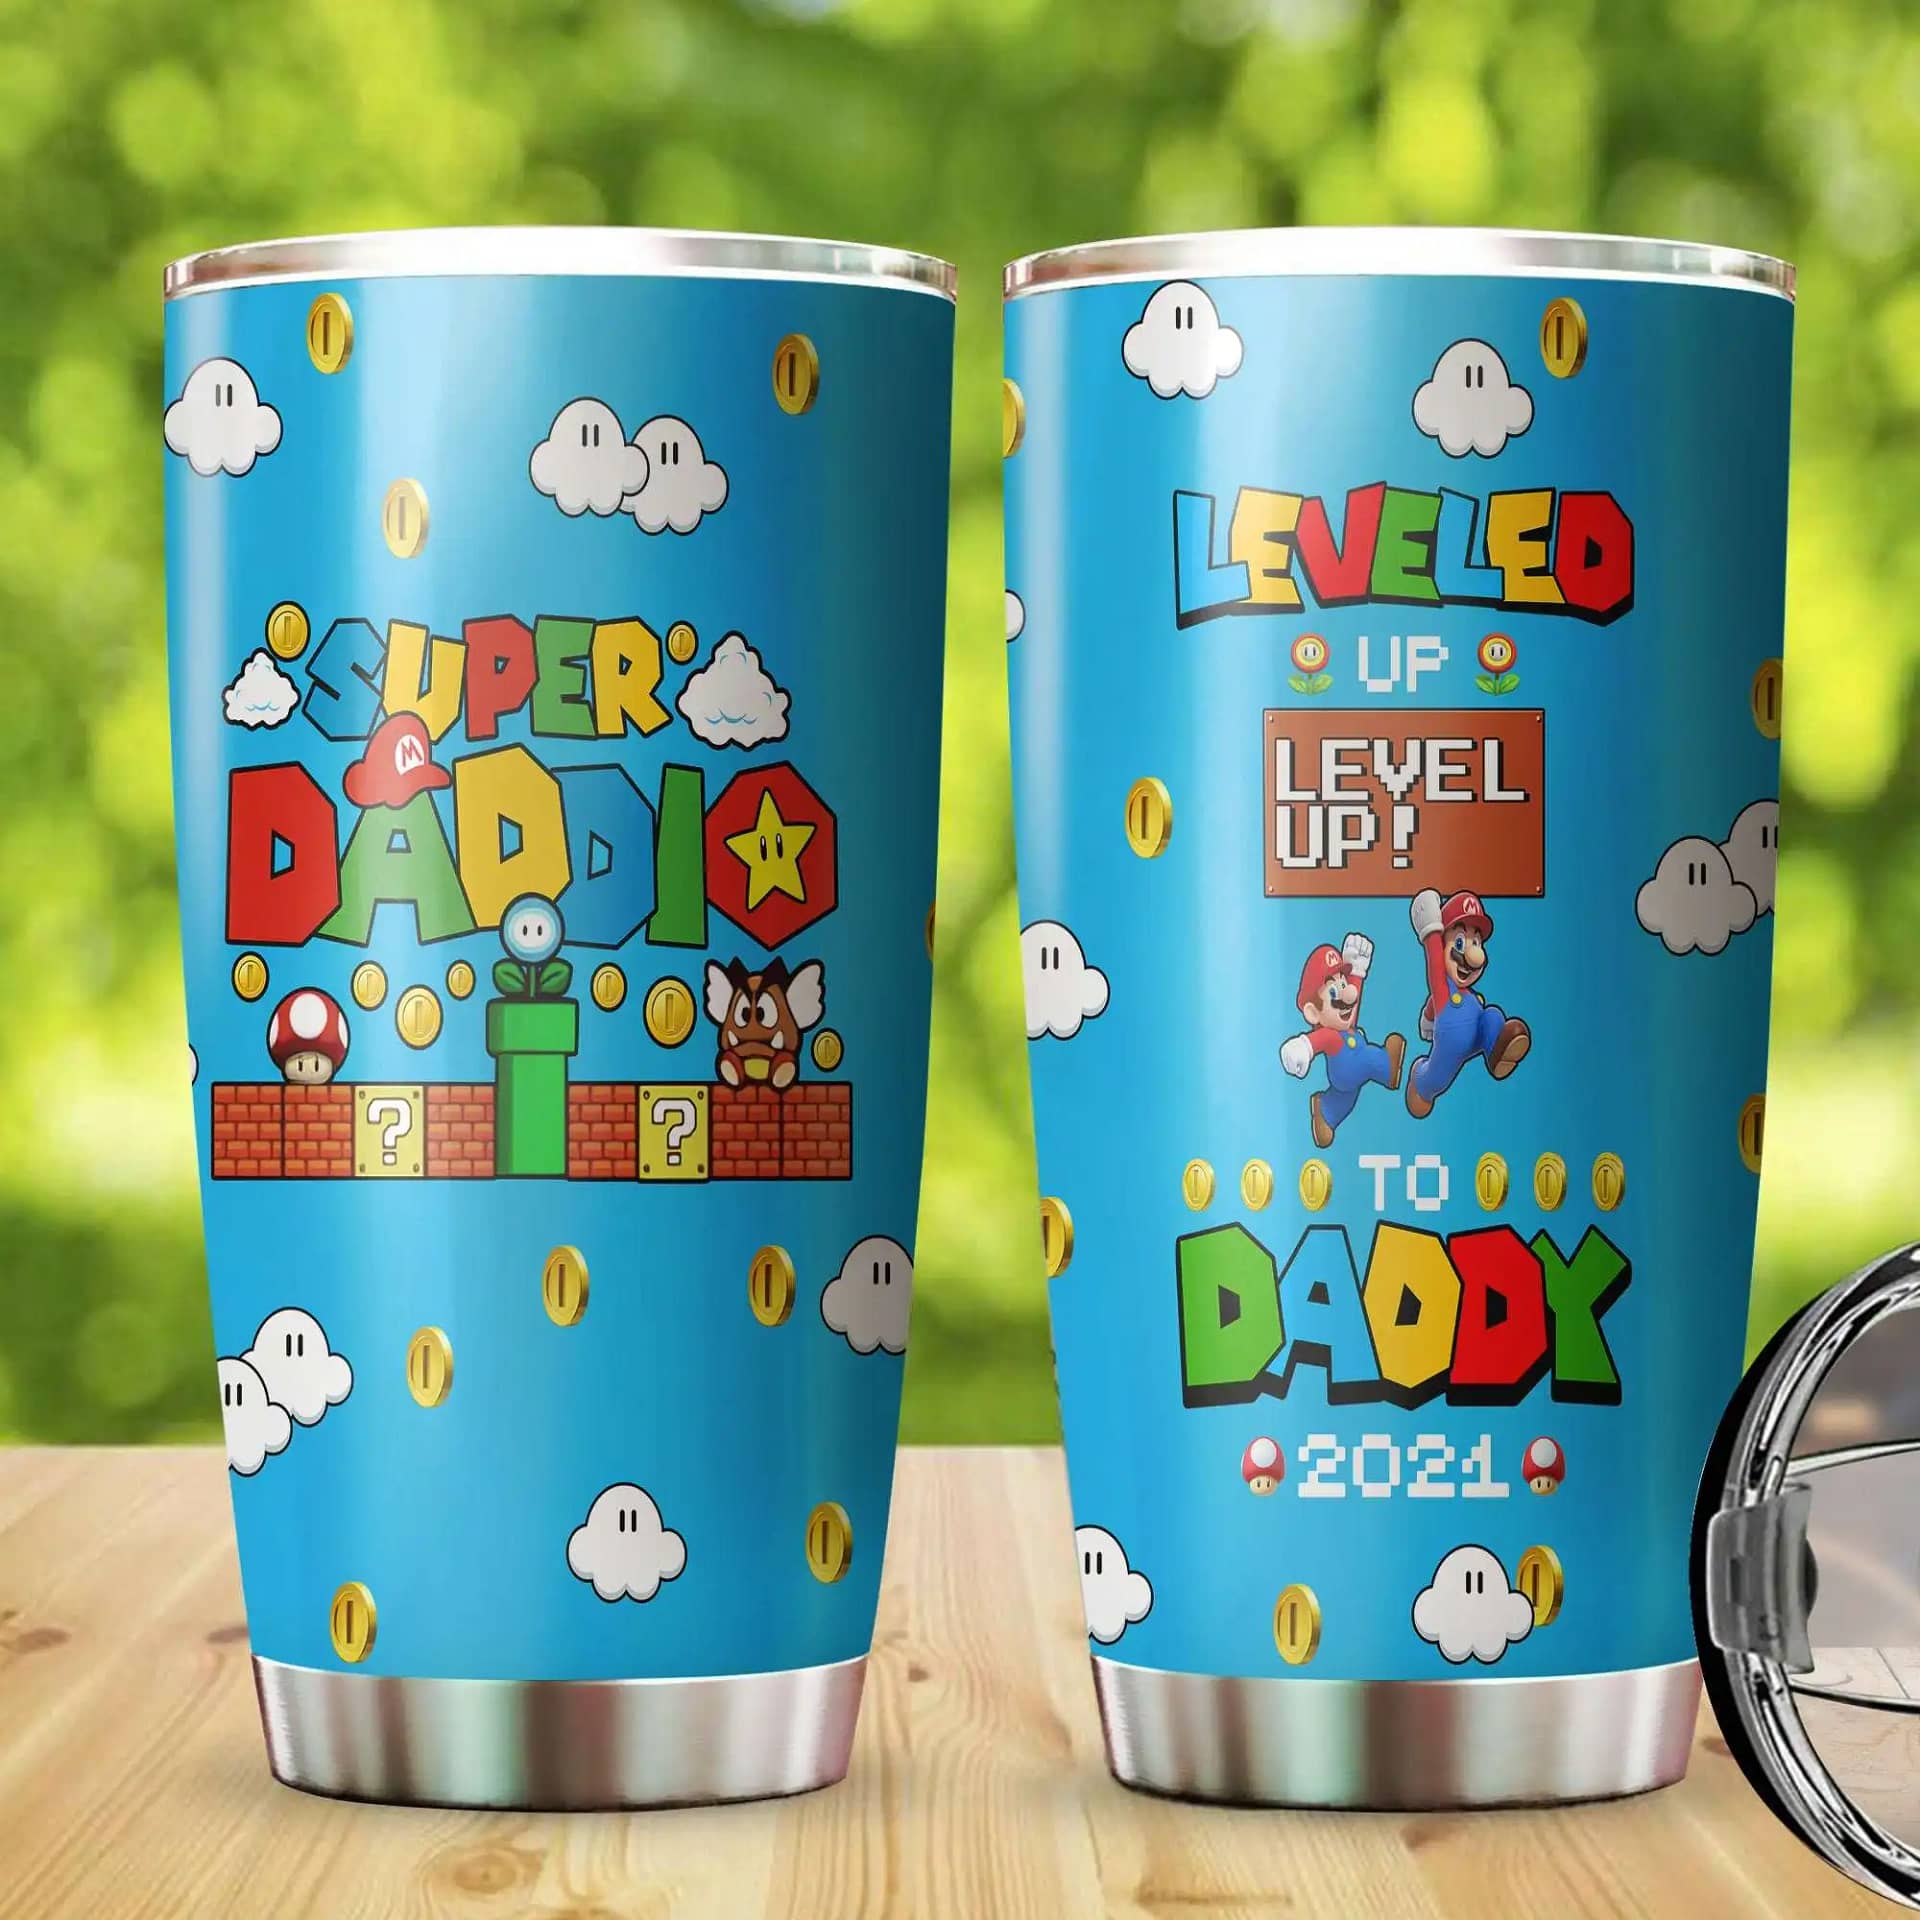 Super Daddio Lveled Up To Daddy 2021 Mario Gift Stainless Steel Tumbler